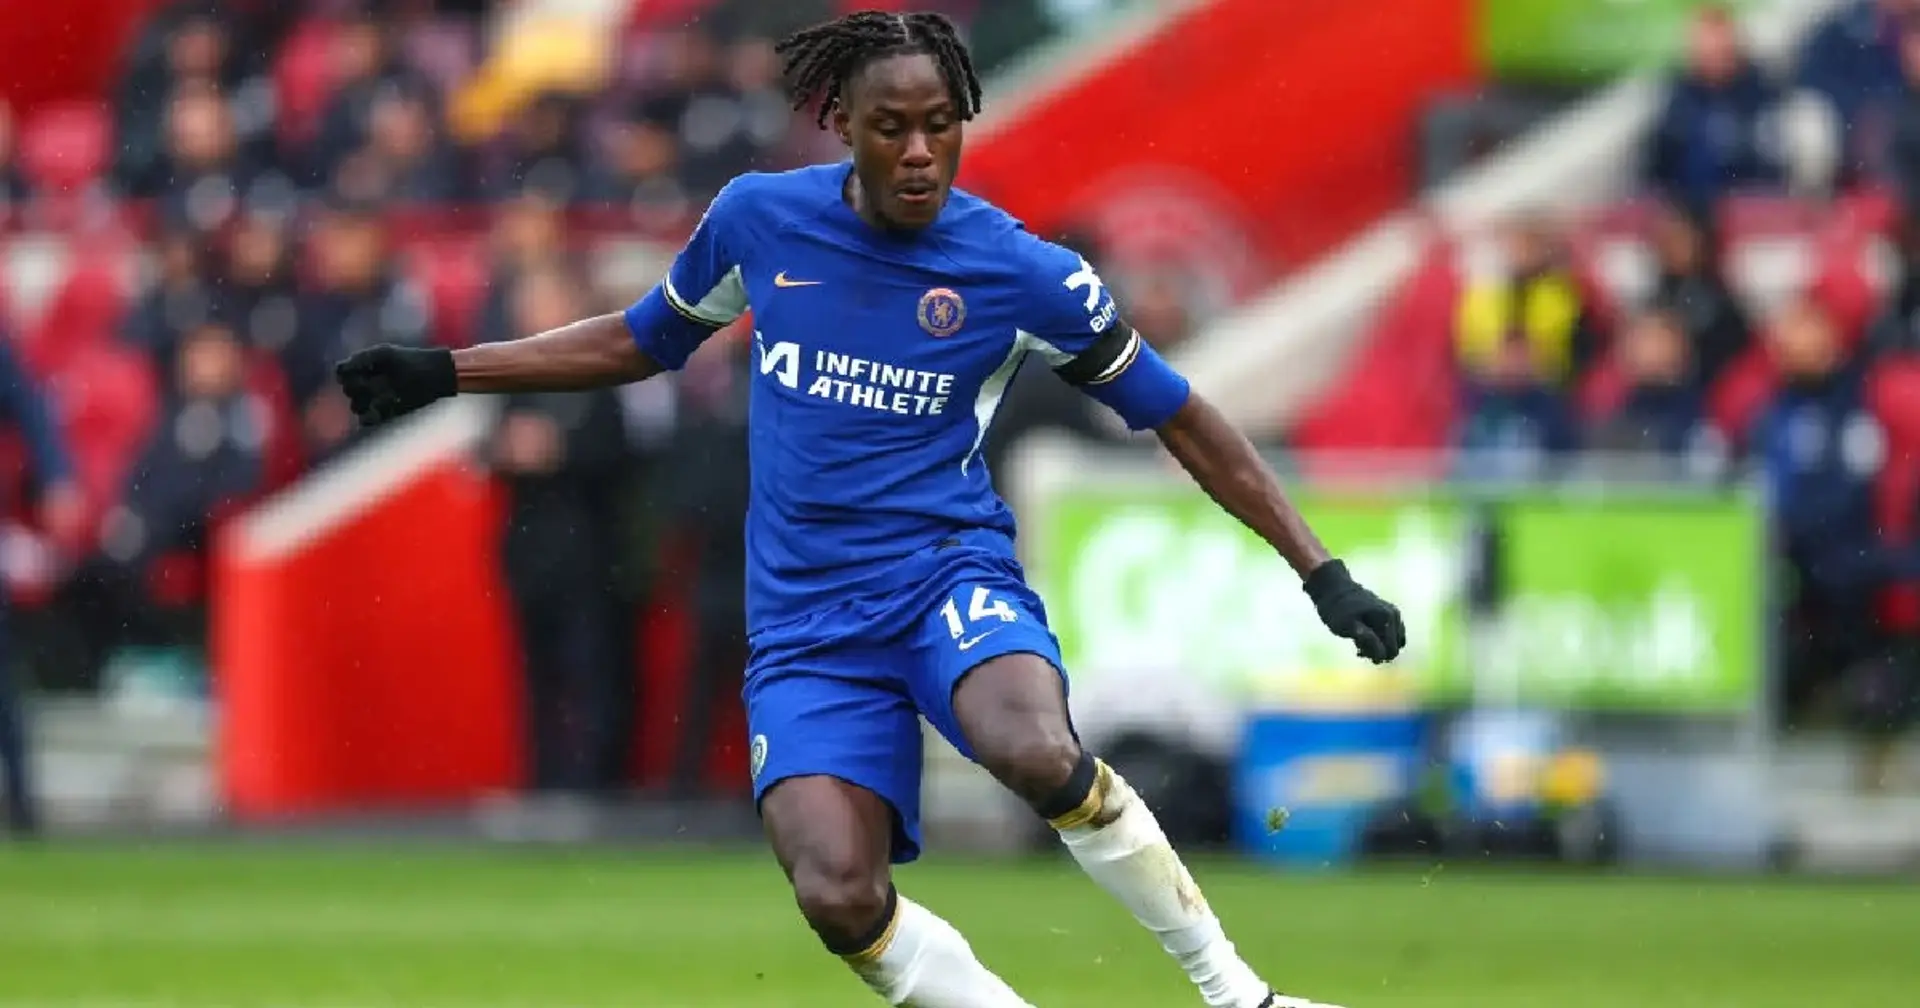 'My legs were really feeling it in those last minutes': Chalobah makes admission over FA Cup performance